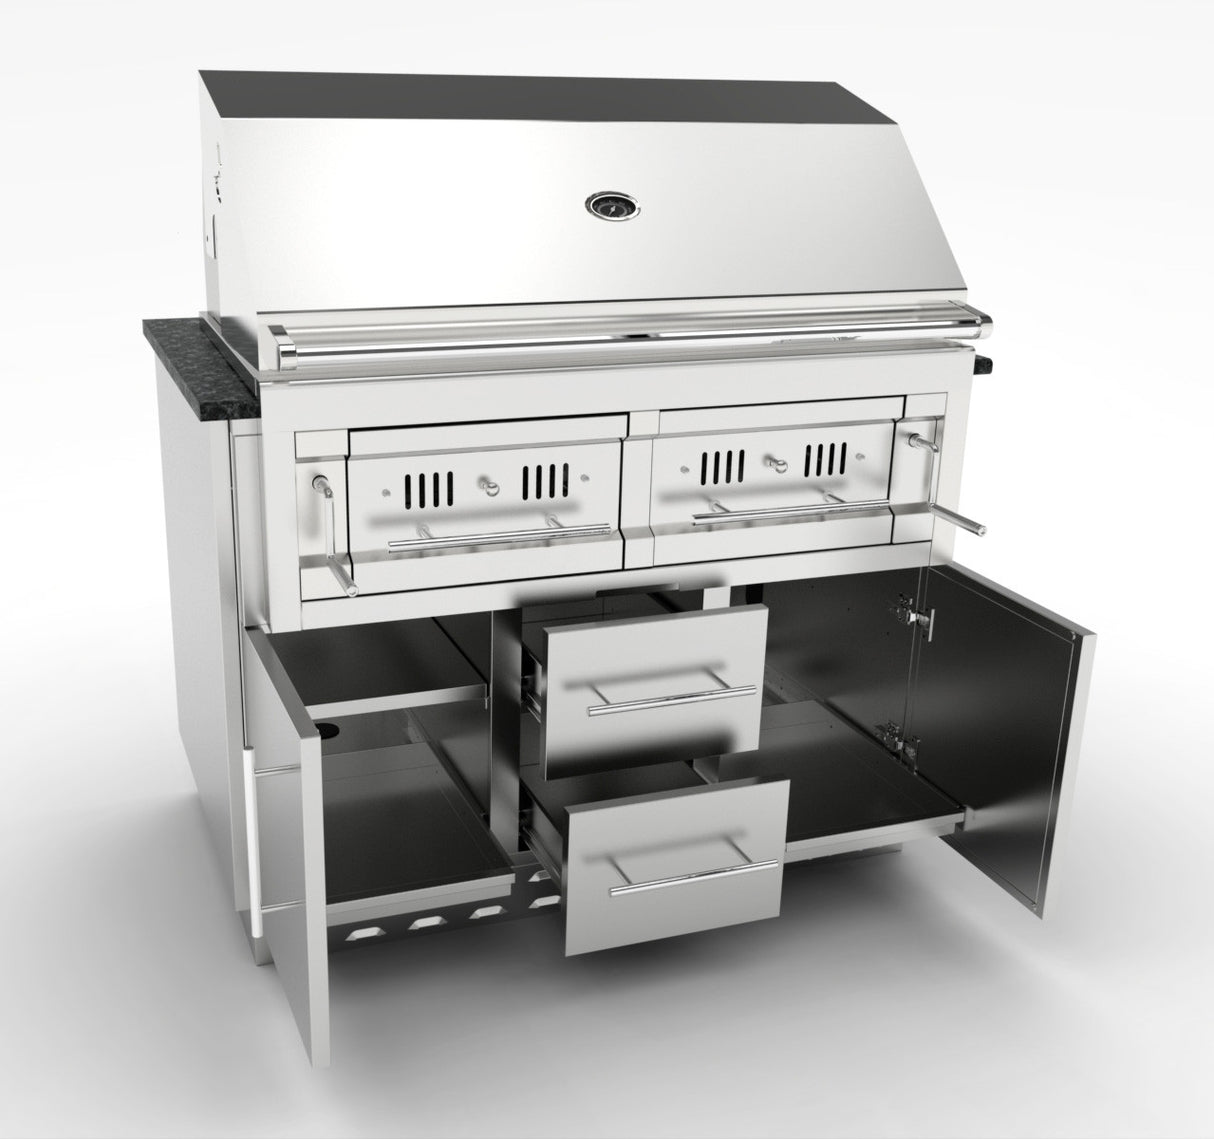 STAINLESS STEEL MODULE UNDER BARBECUE 5 BURNERS